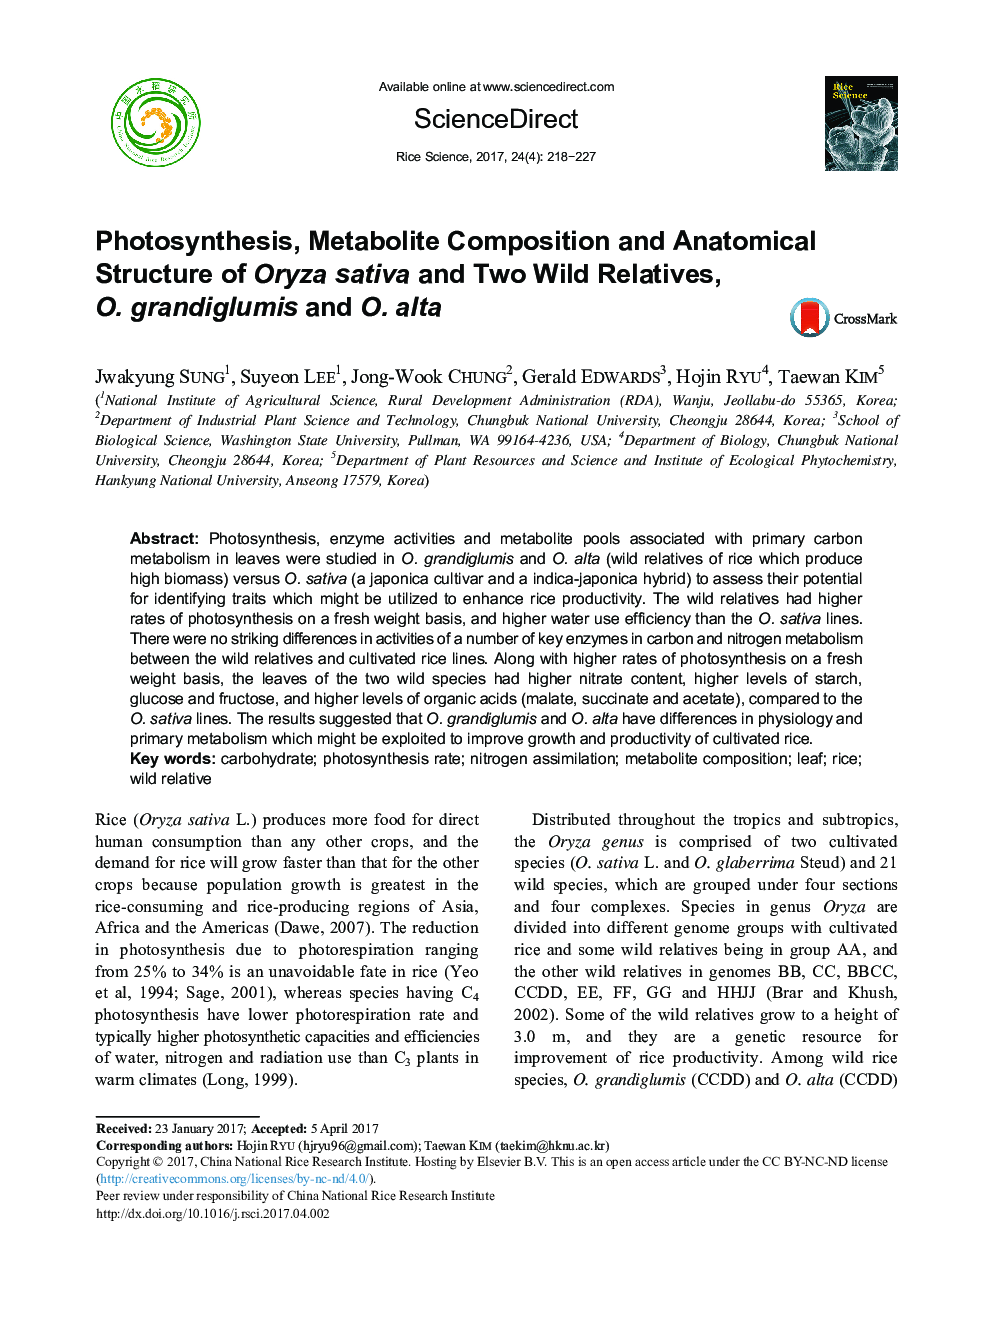 Photosynthesis, Metabolite Composition and Anatomical Structure of Oryza sativa and Two Wild Relatives, O. grandiglumis and O. alta